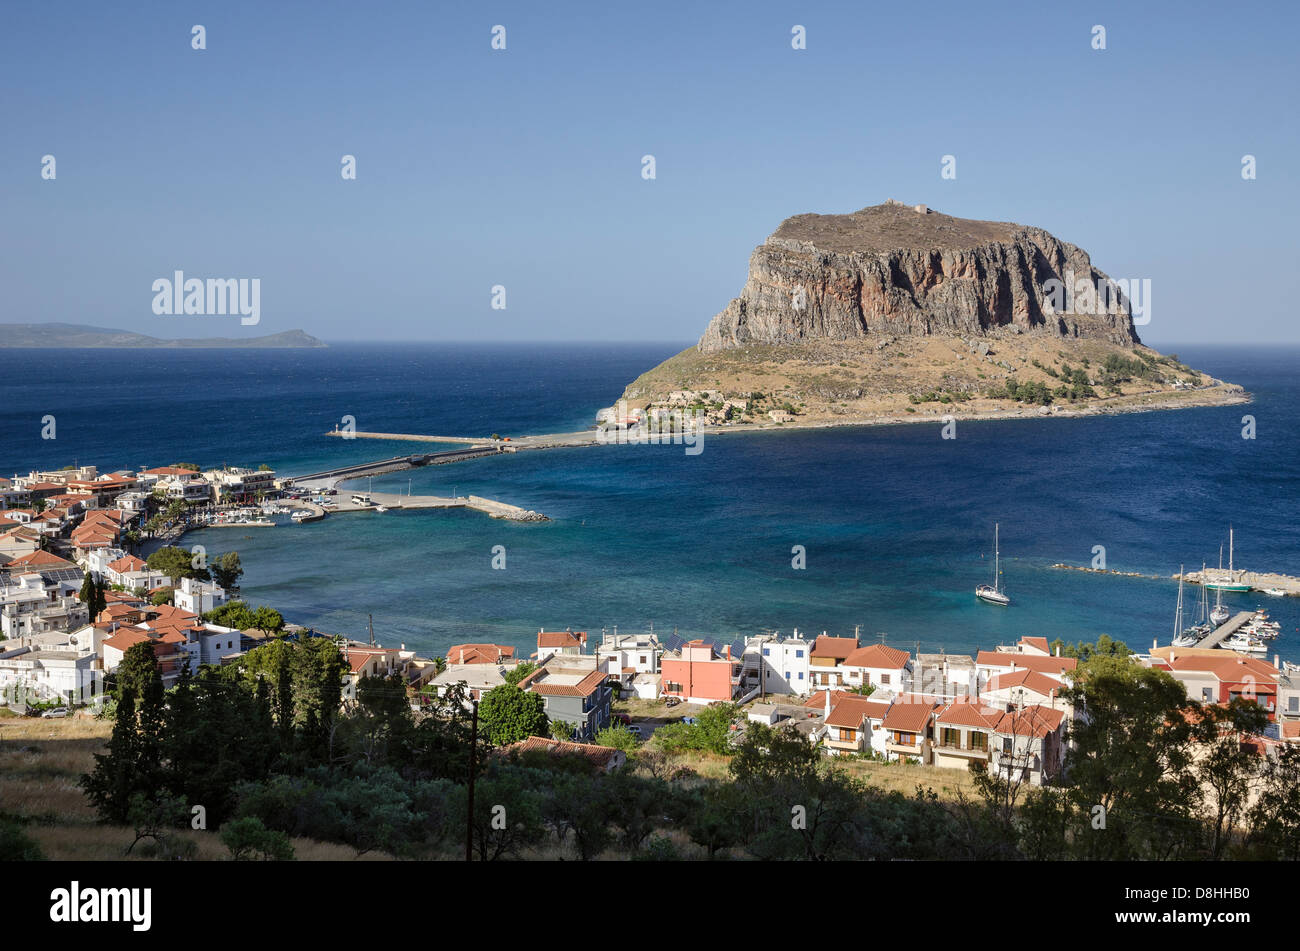 The old rock of Monemvasia and the village and harbour of Yefira, Lakonia, Southern Peloponnese, Greece. Stock Photo